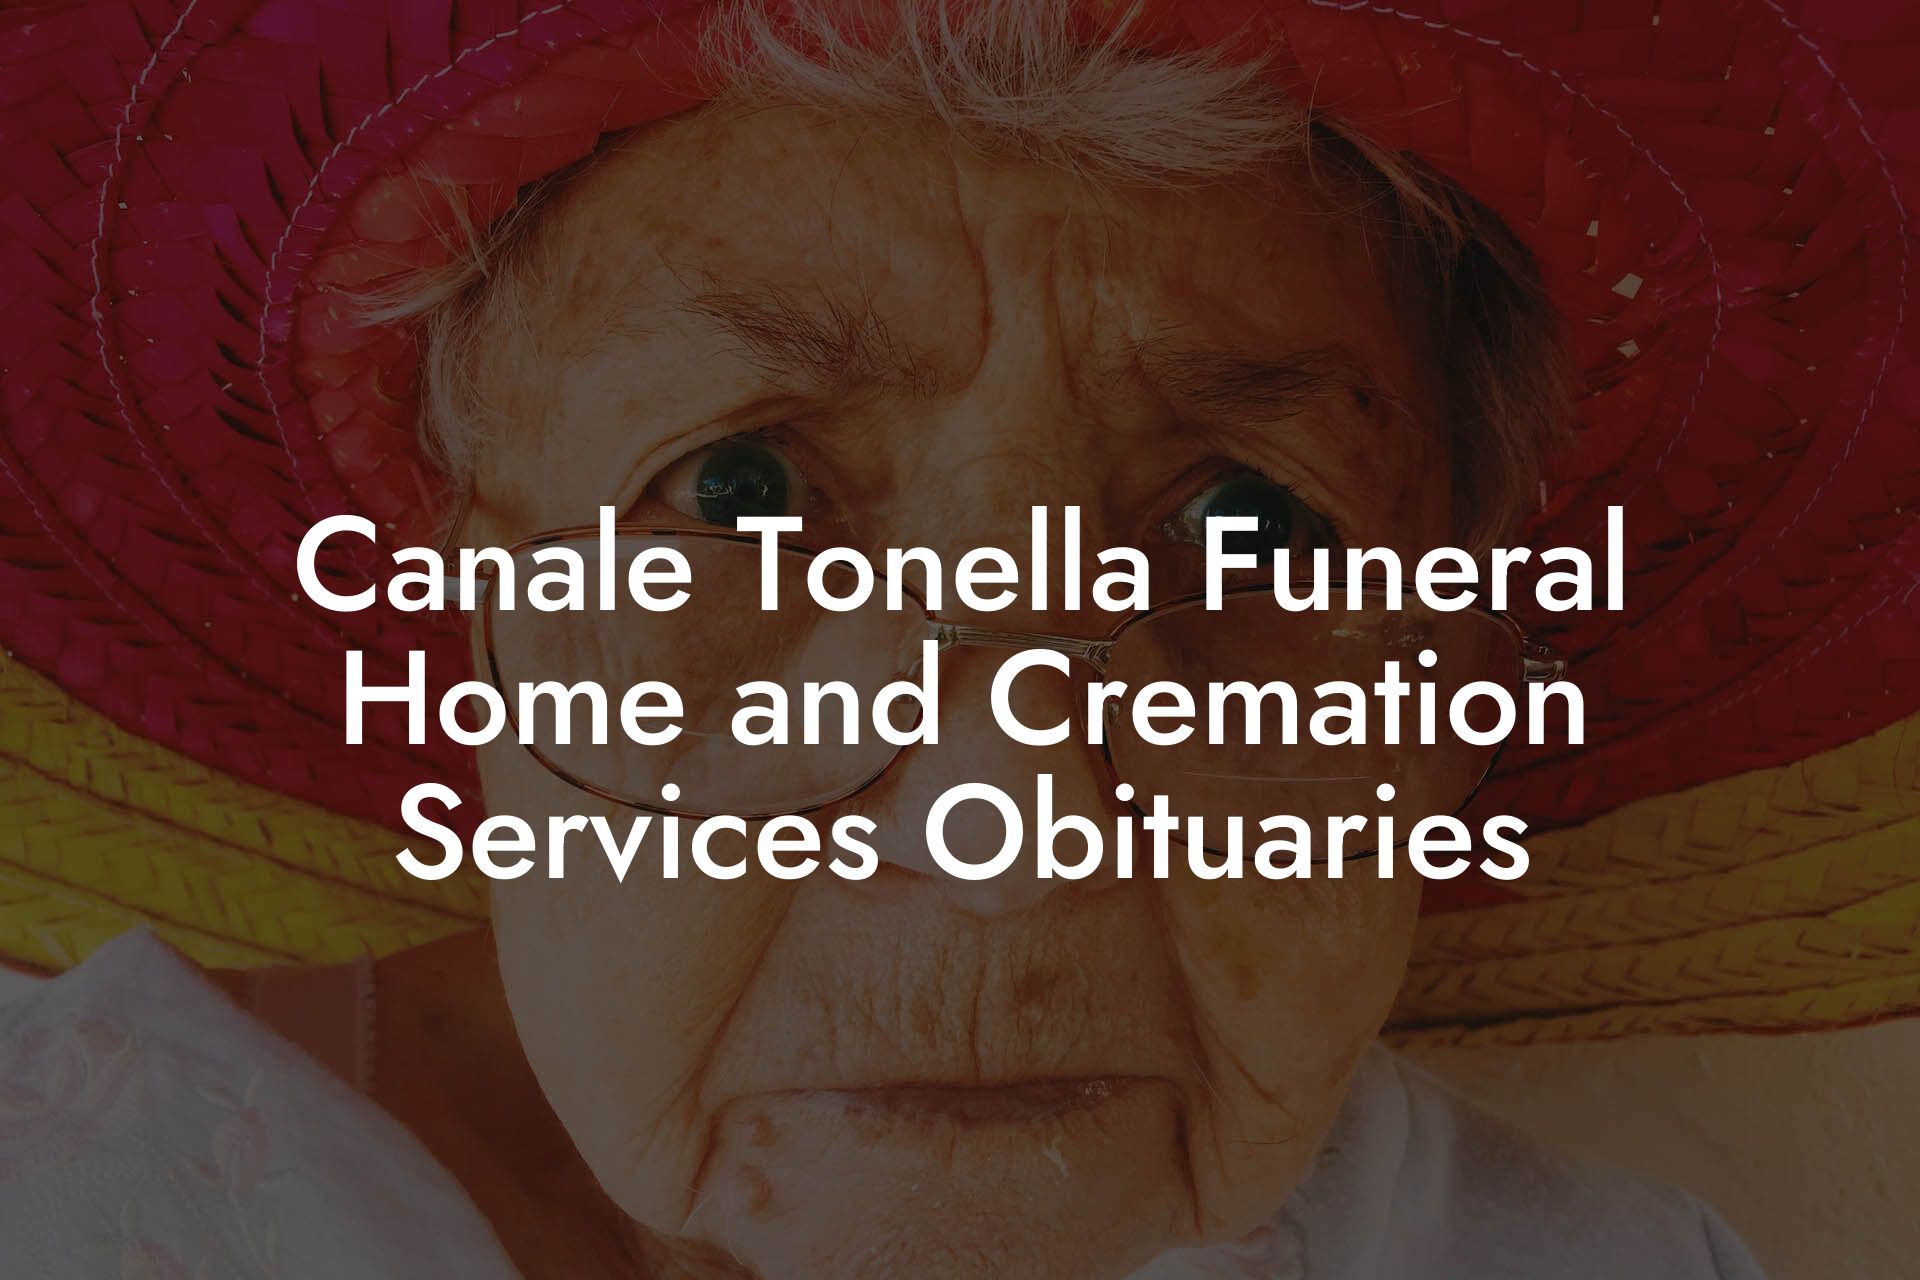 Canale Tonella Funeral Home and Cremation Services Obituaries